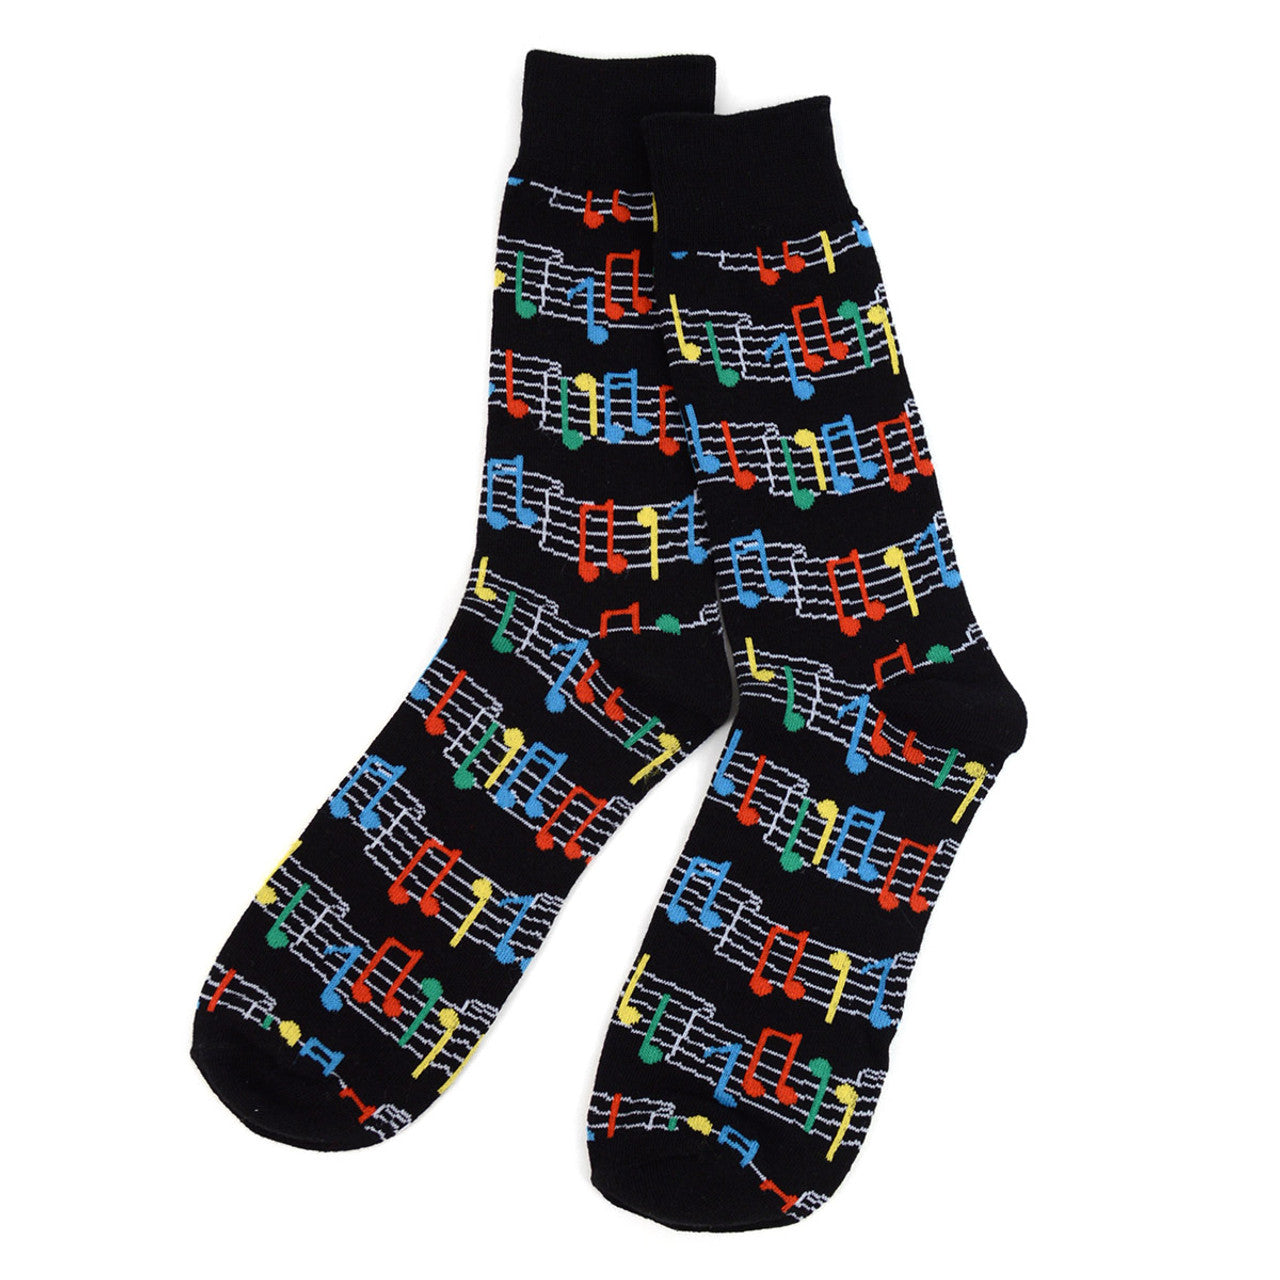 Fun Socks Men's Colorful Music Sheet Rock and Roll Music Lovers Musician Gifts Music Writter Music Notes